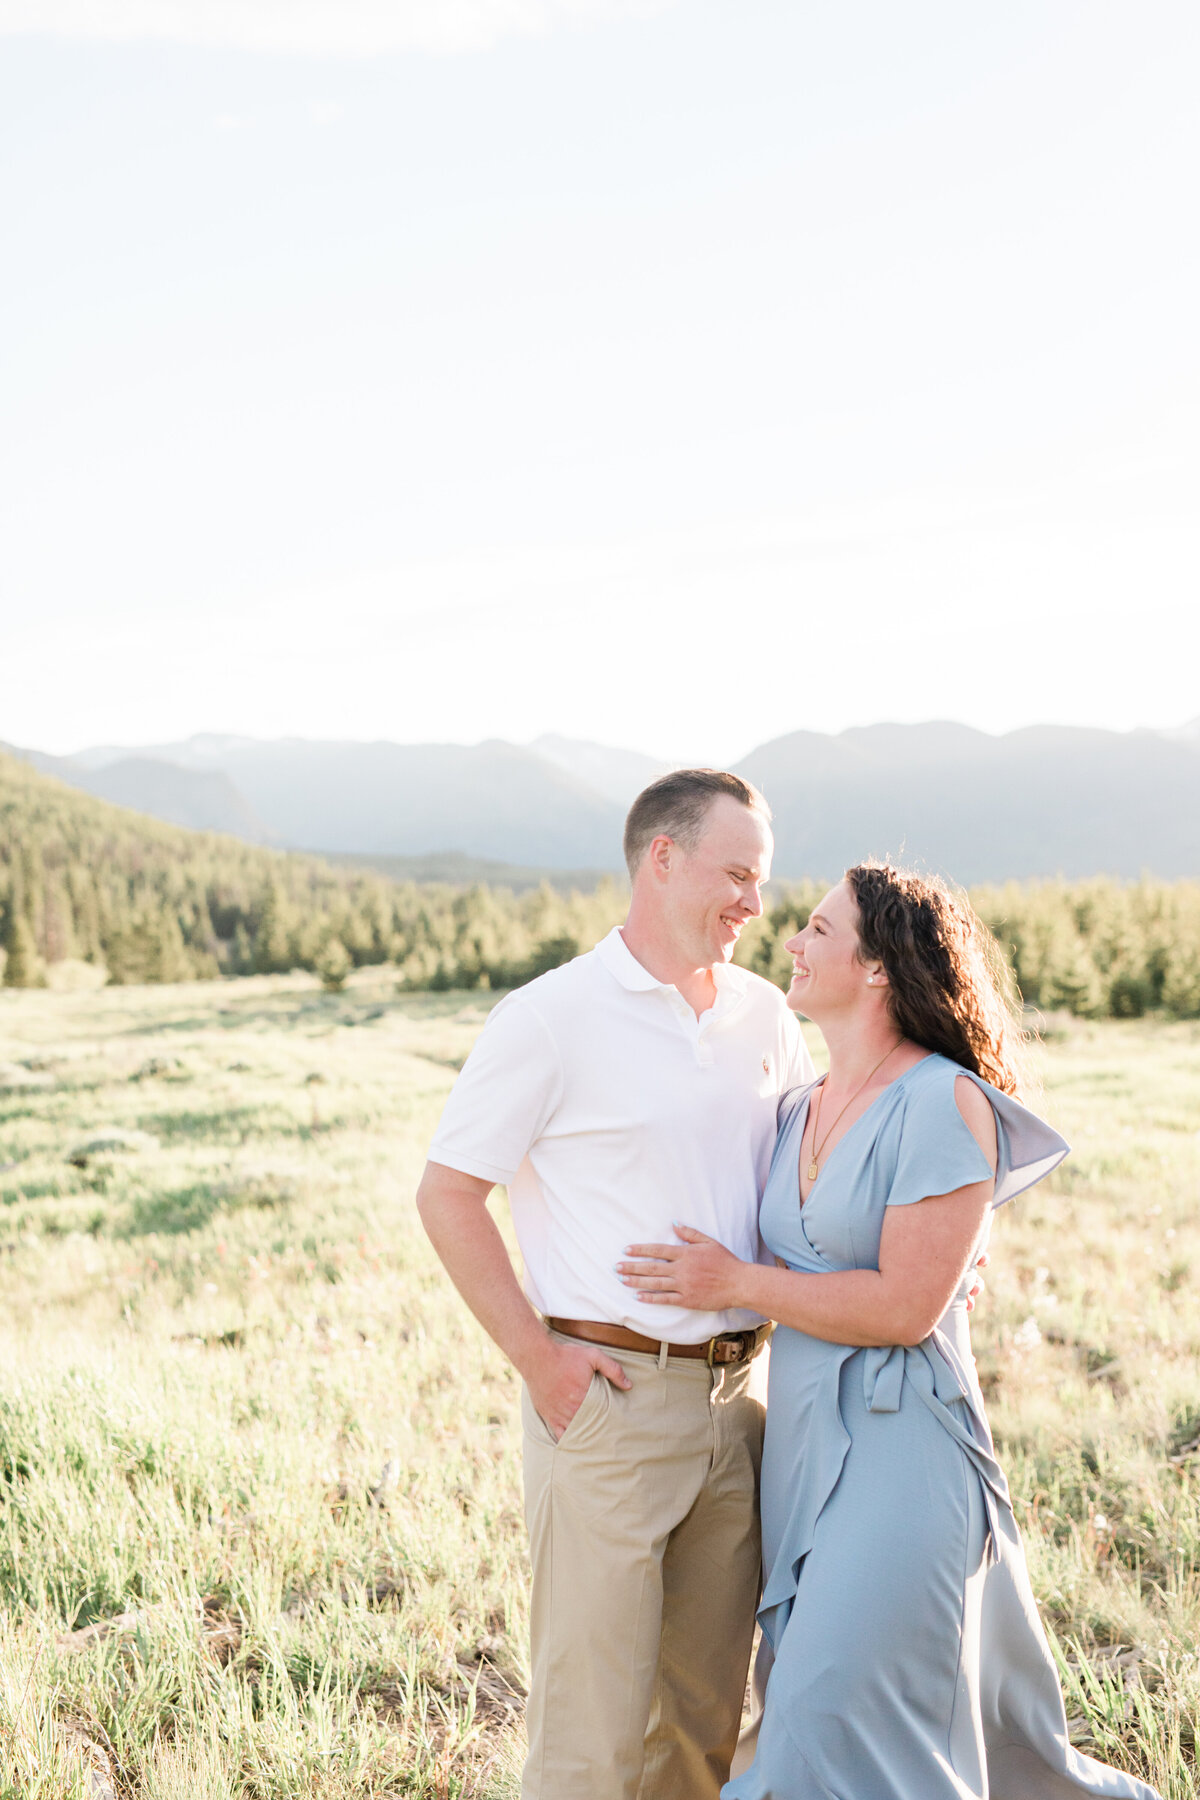 A couple in warm summer attire hold each other in a green grassy field in the ten mile range